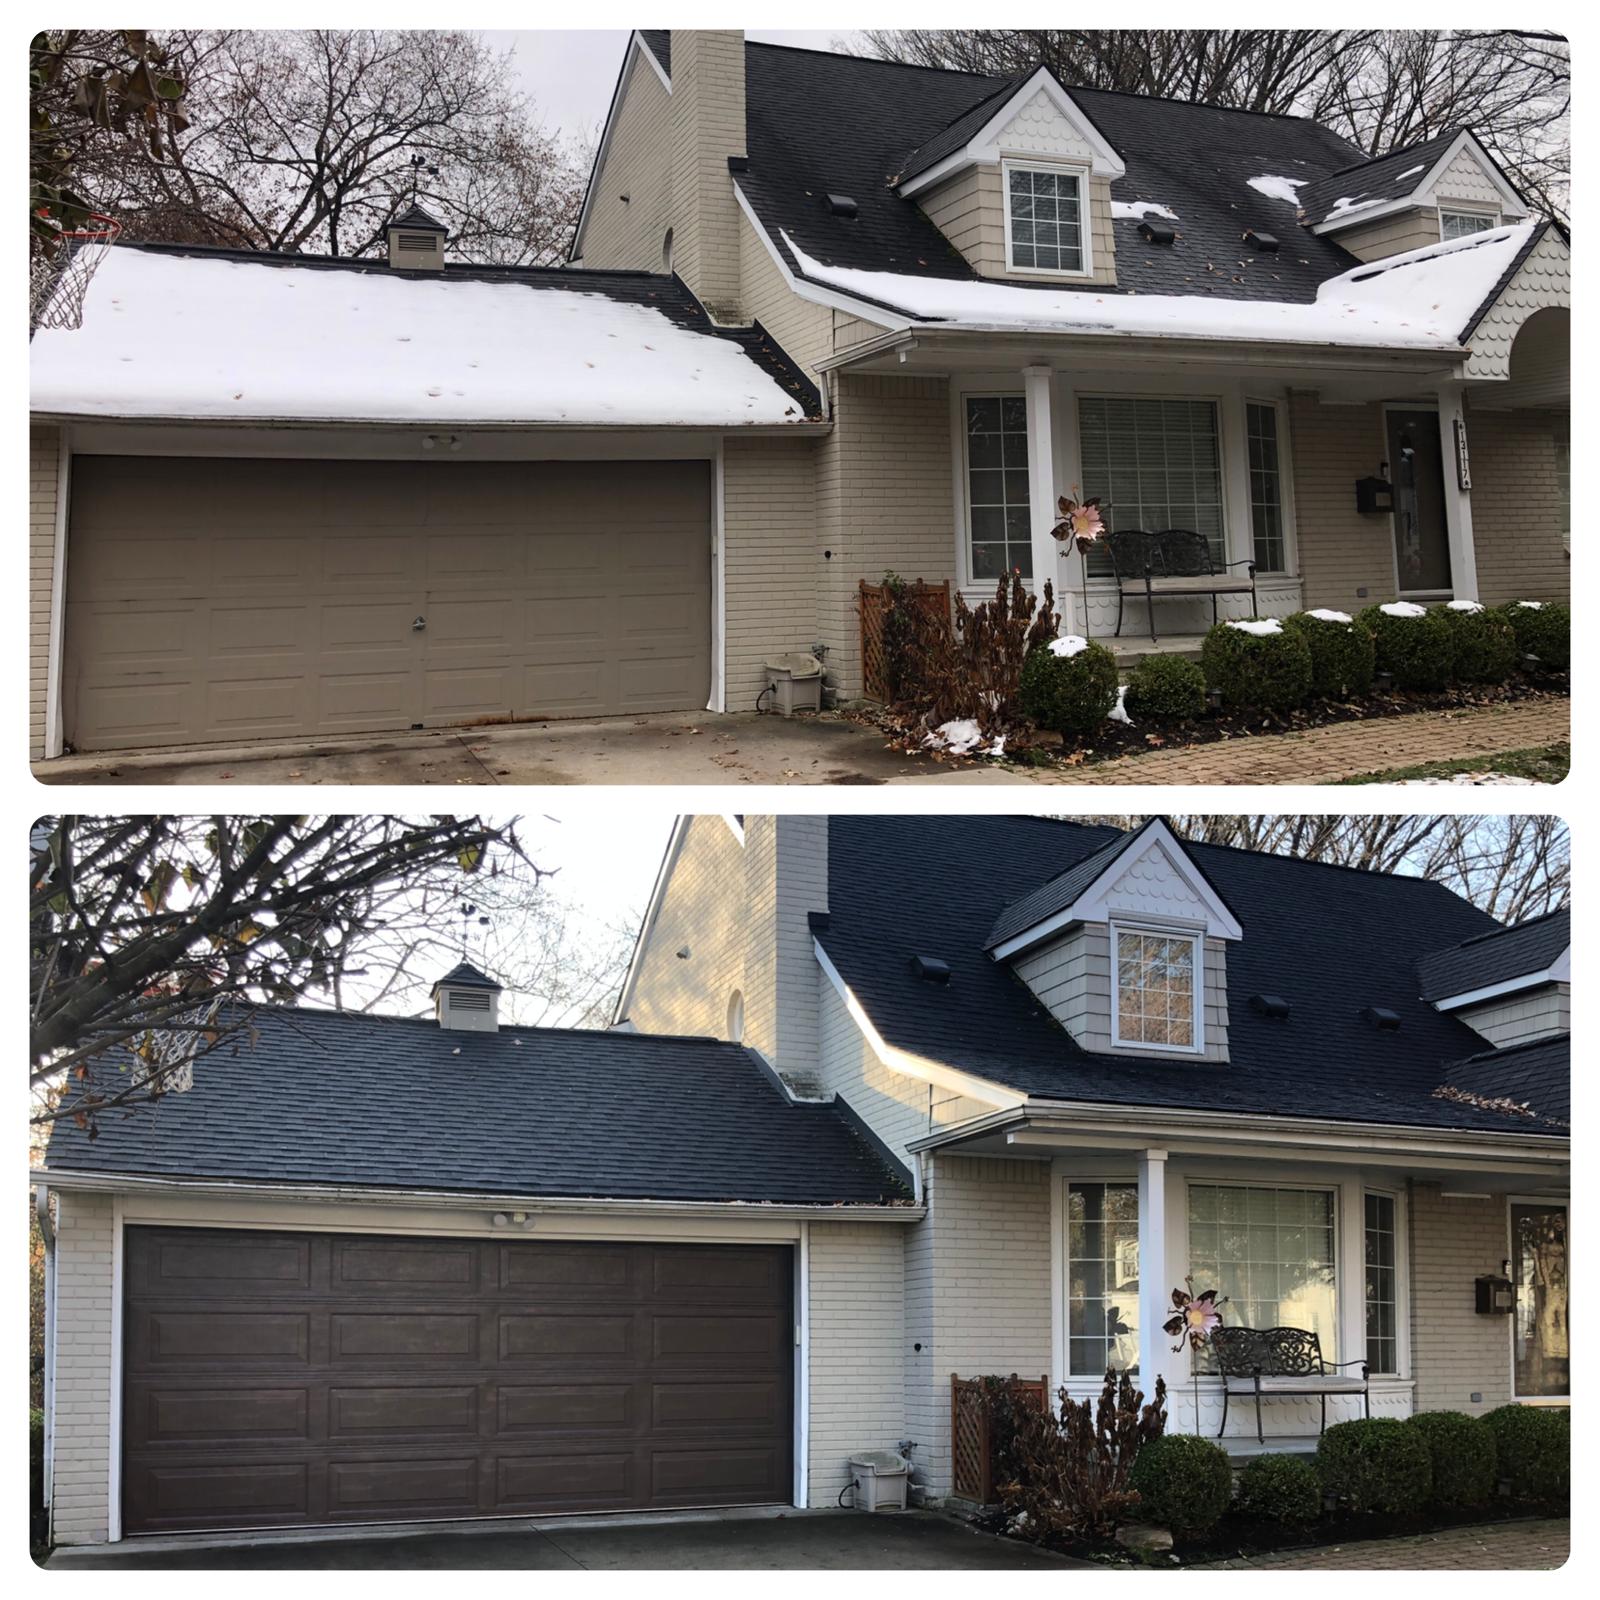 Any style, any color - we install garage doors of all shapes and sizes!